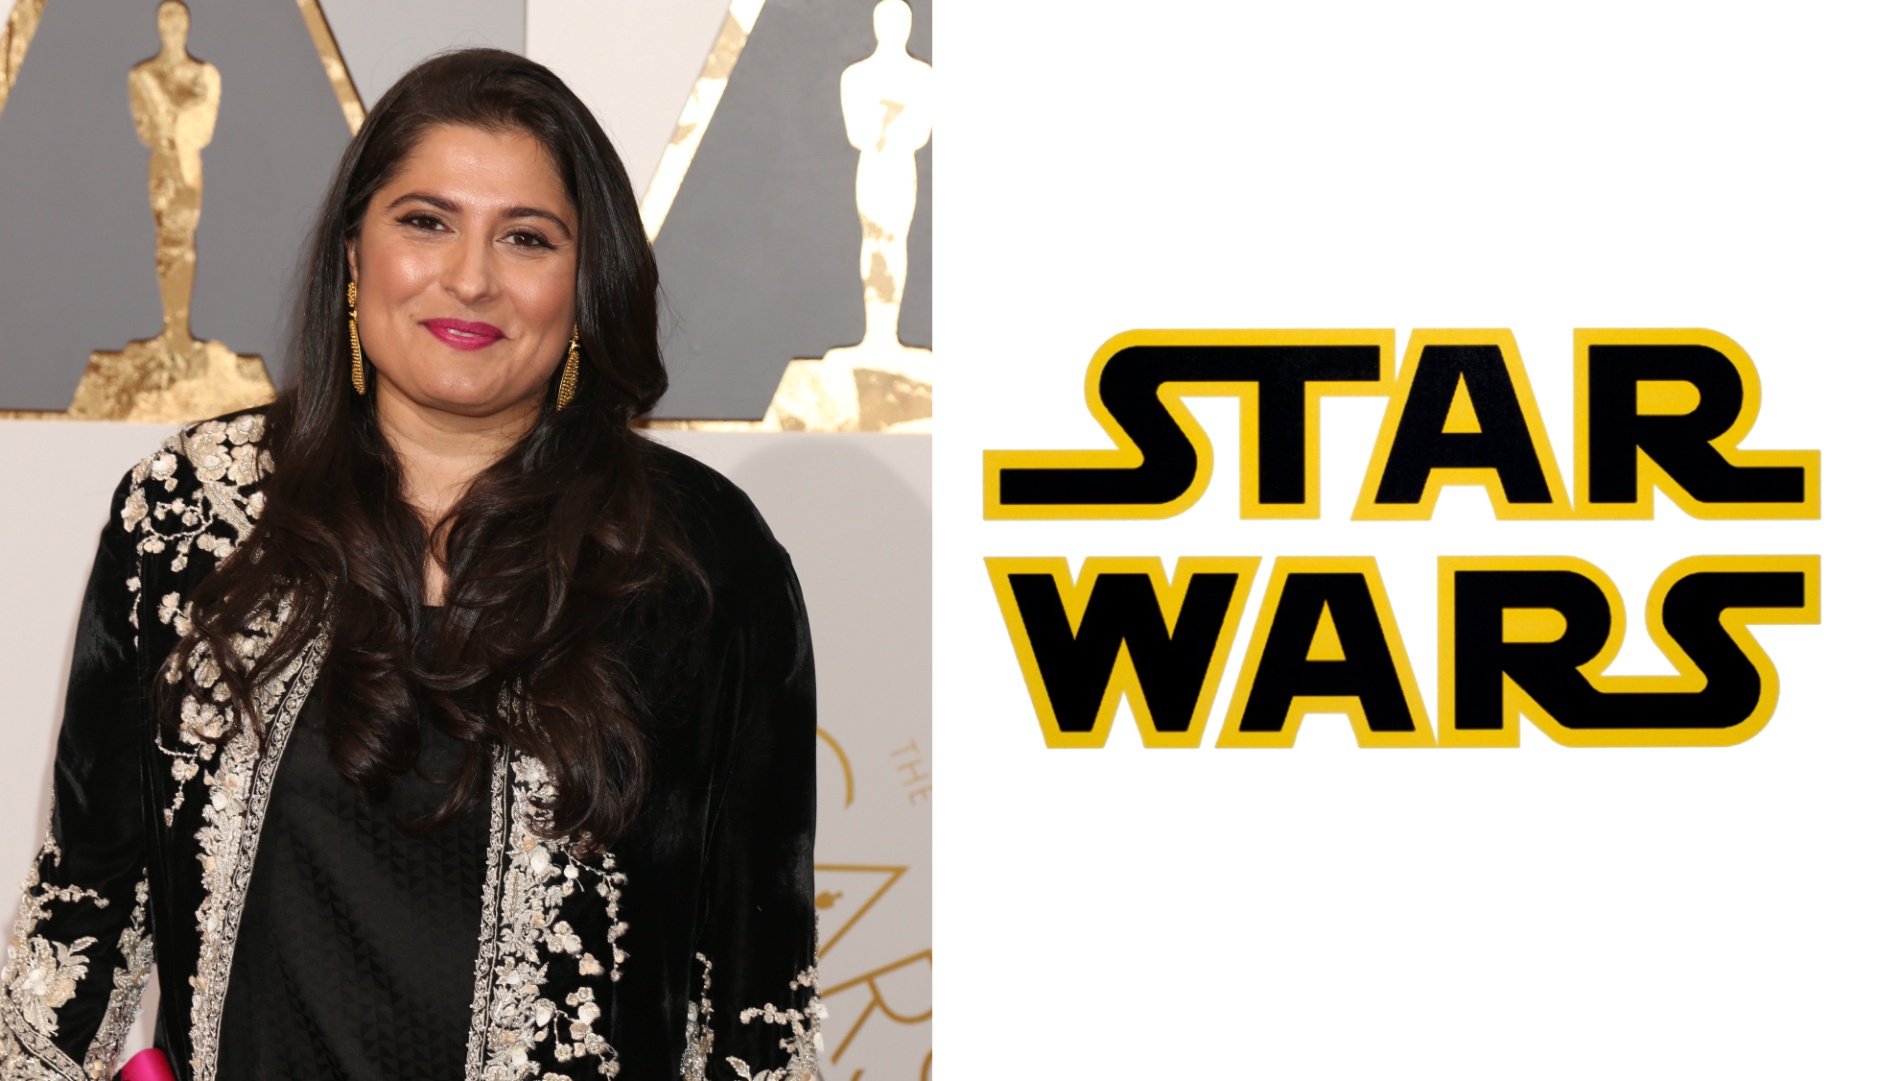 A New 'Star Wars' Film Is Being Directed by Sharmeen Obaid-Chinoy